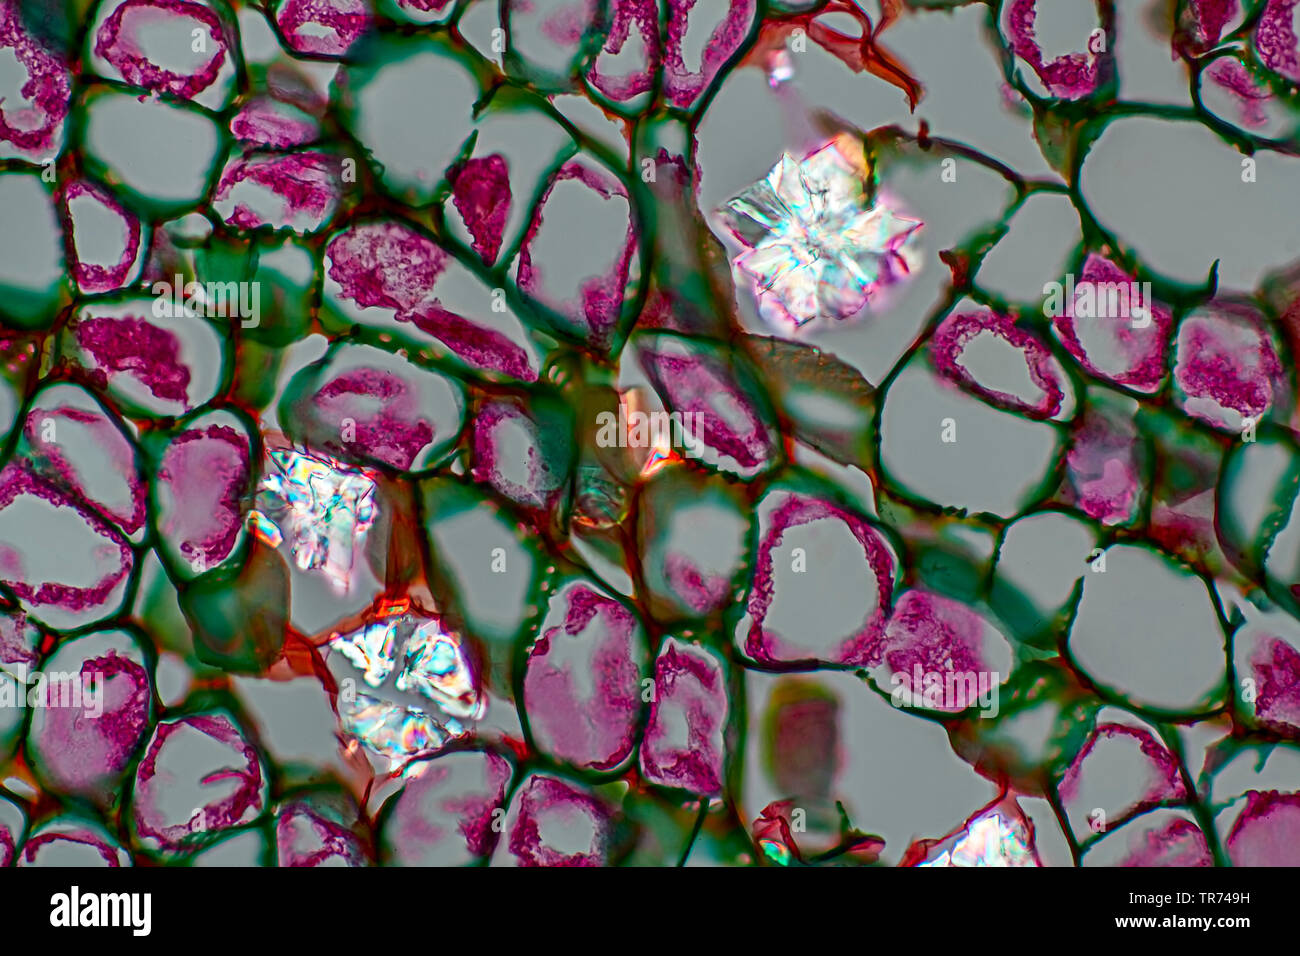 Woodbine berry (Parthenocissus spec.), calcium oxalate crystals in cells of Partenocissus in polarized light, x 60 Stock Photo